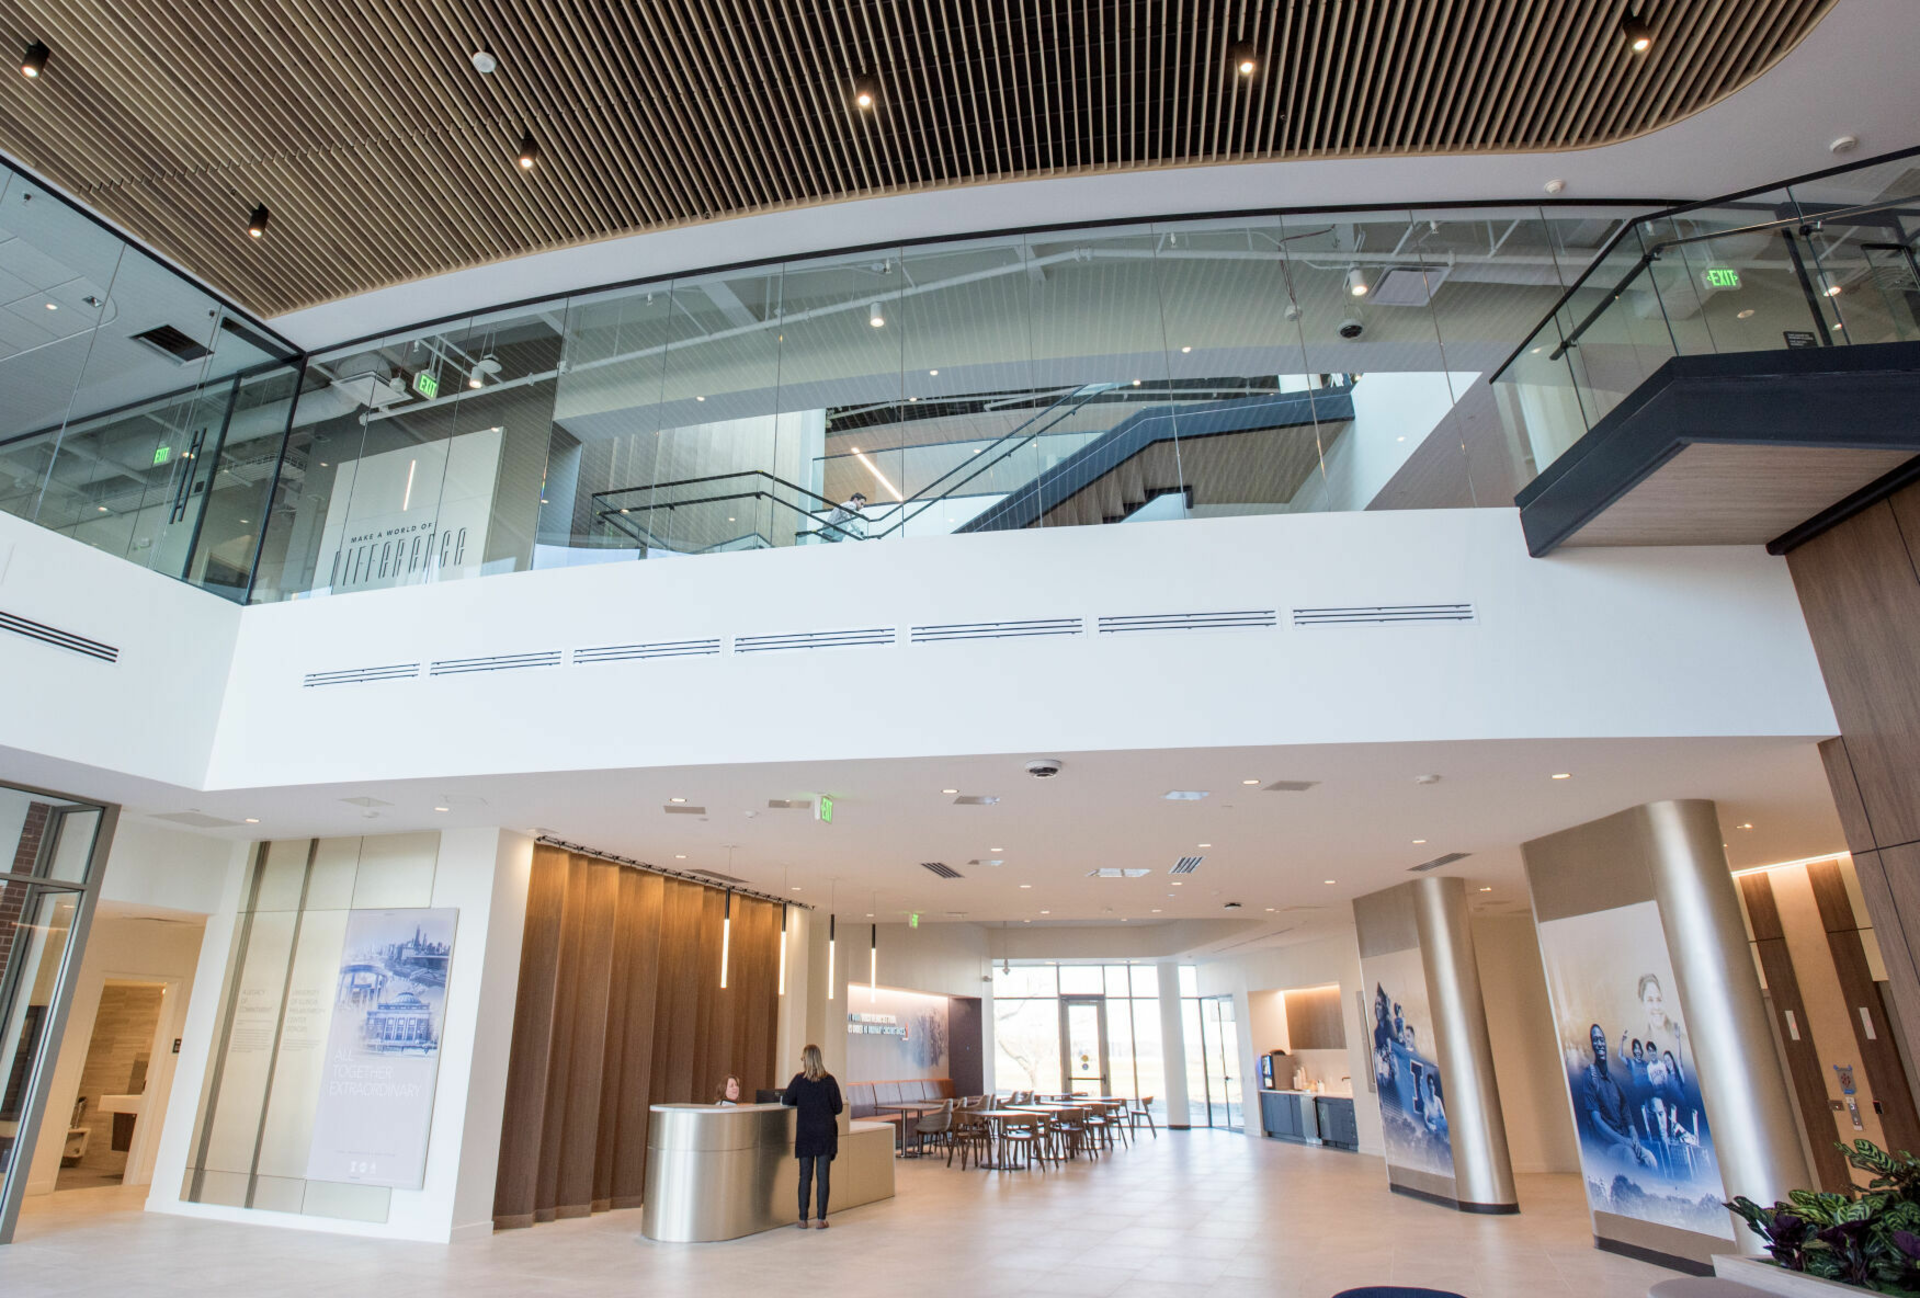 Lobby of the UIF Philanthropy Center that includes the front desk and the second floor balcony